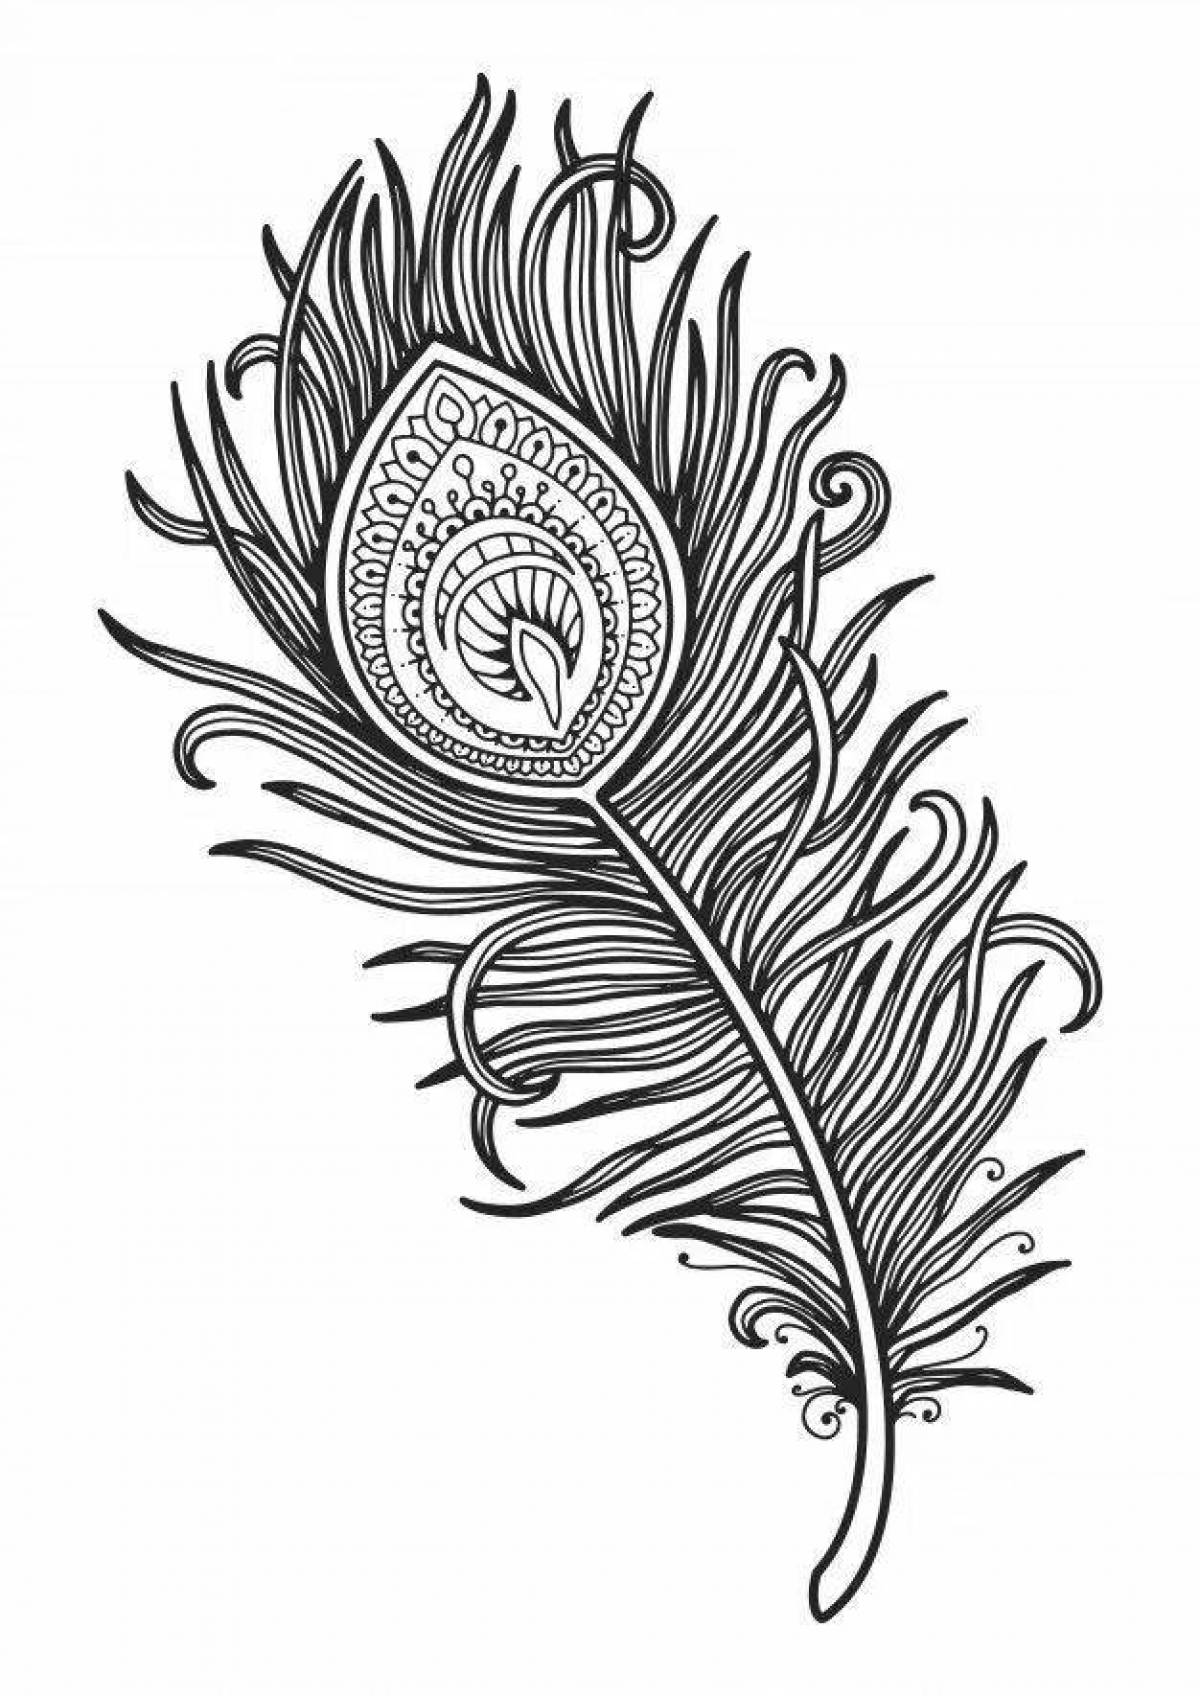 Adorable peacock feather coloring page